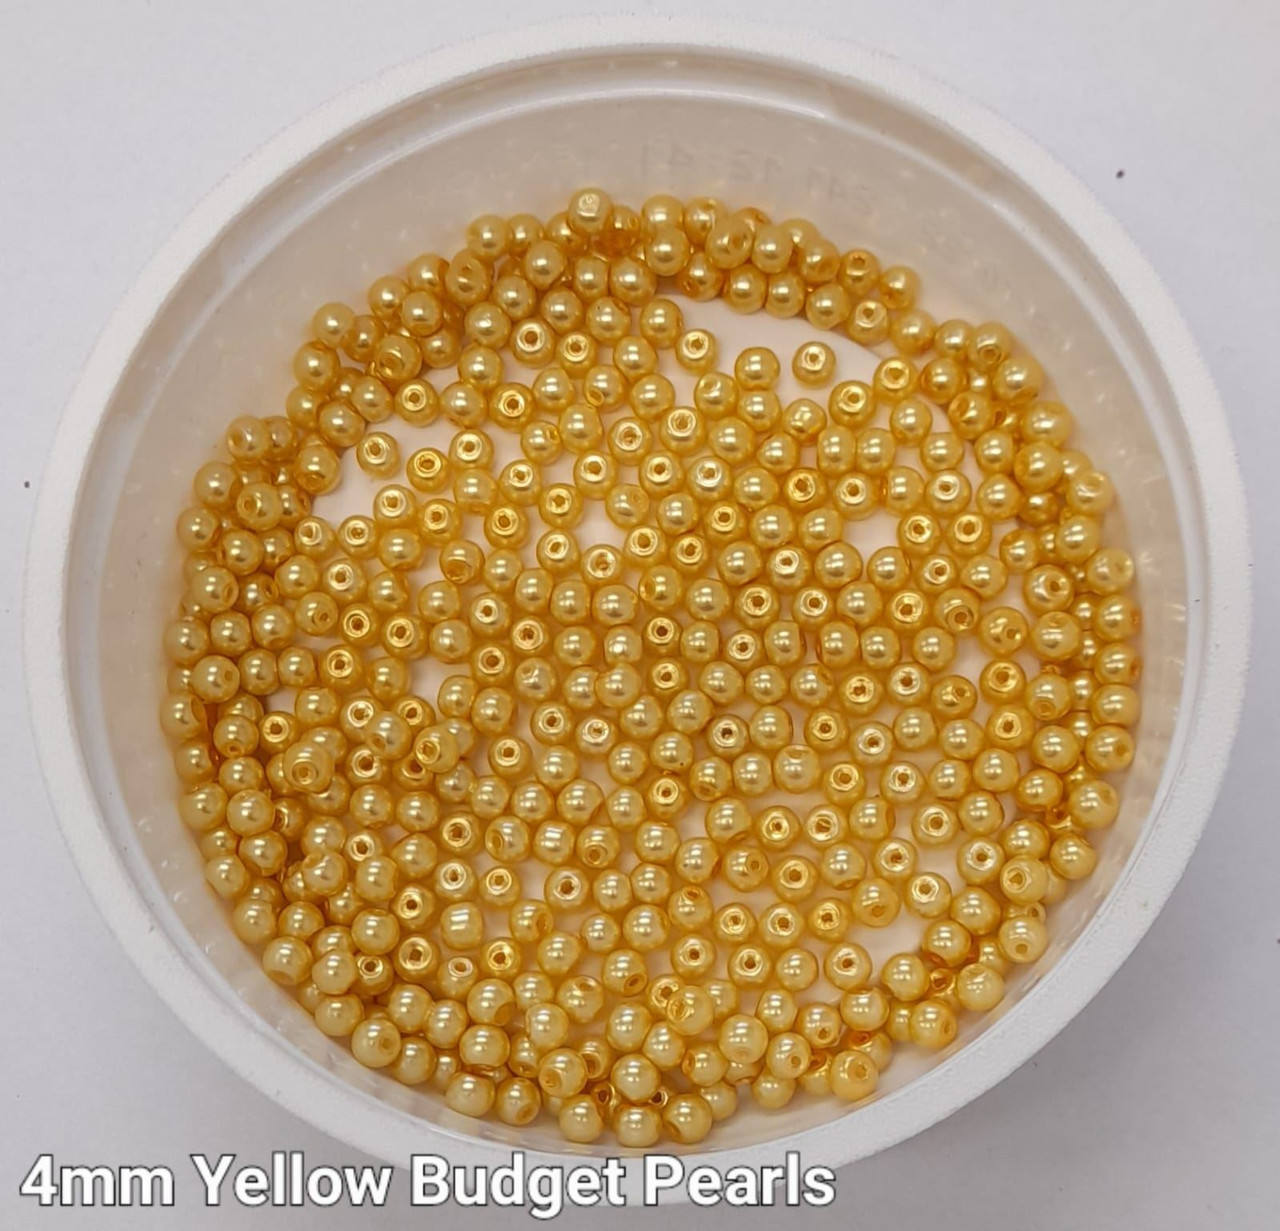 4mm budget Glass Pearls - Yellow (500 beads)